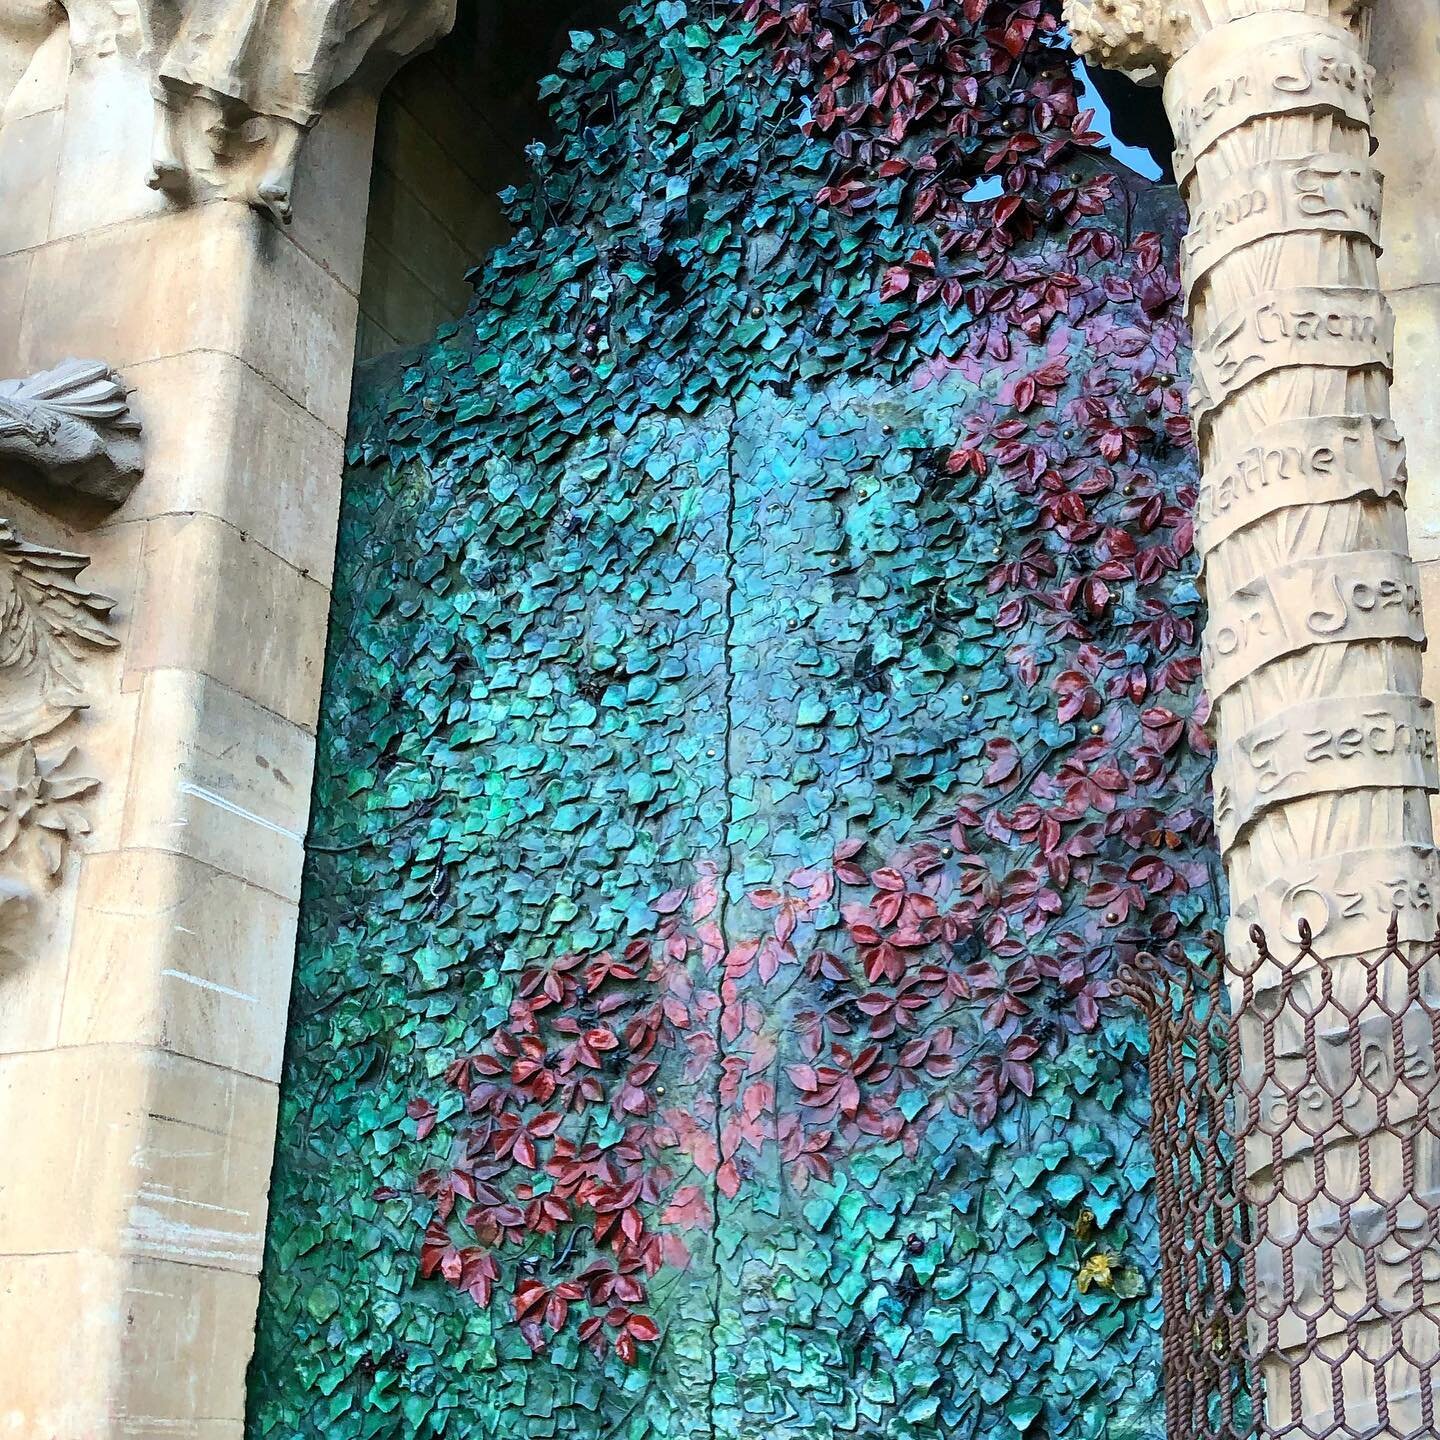 The beautiful Nativity Façade of the Sagrada Familia by Antoni Gaudi. The bronze &lsquo;gate&rsquo; was actually created by Japanese sculptor Etsuro Sotoo. There are so many aspects of the Sagrada Familia that are incredible this is one one of the s